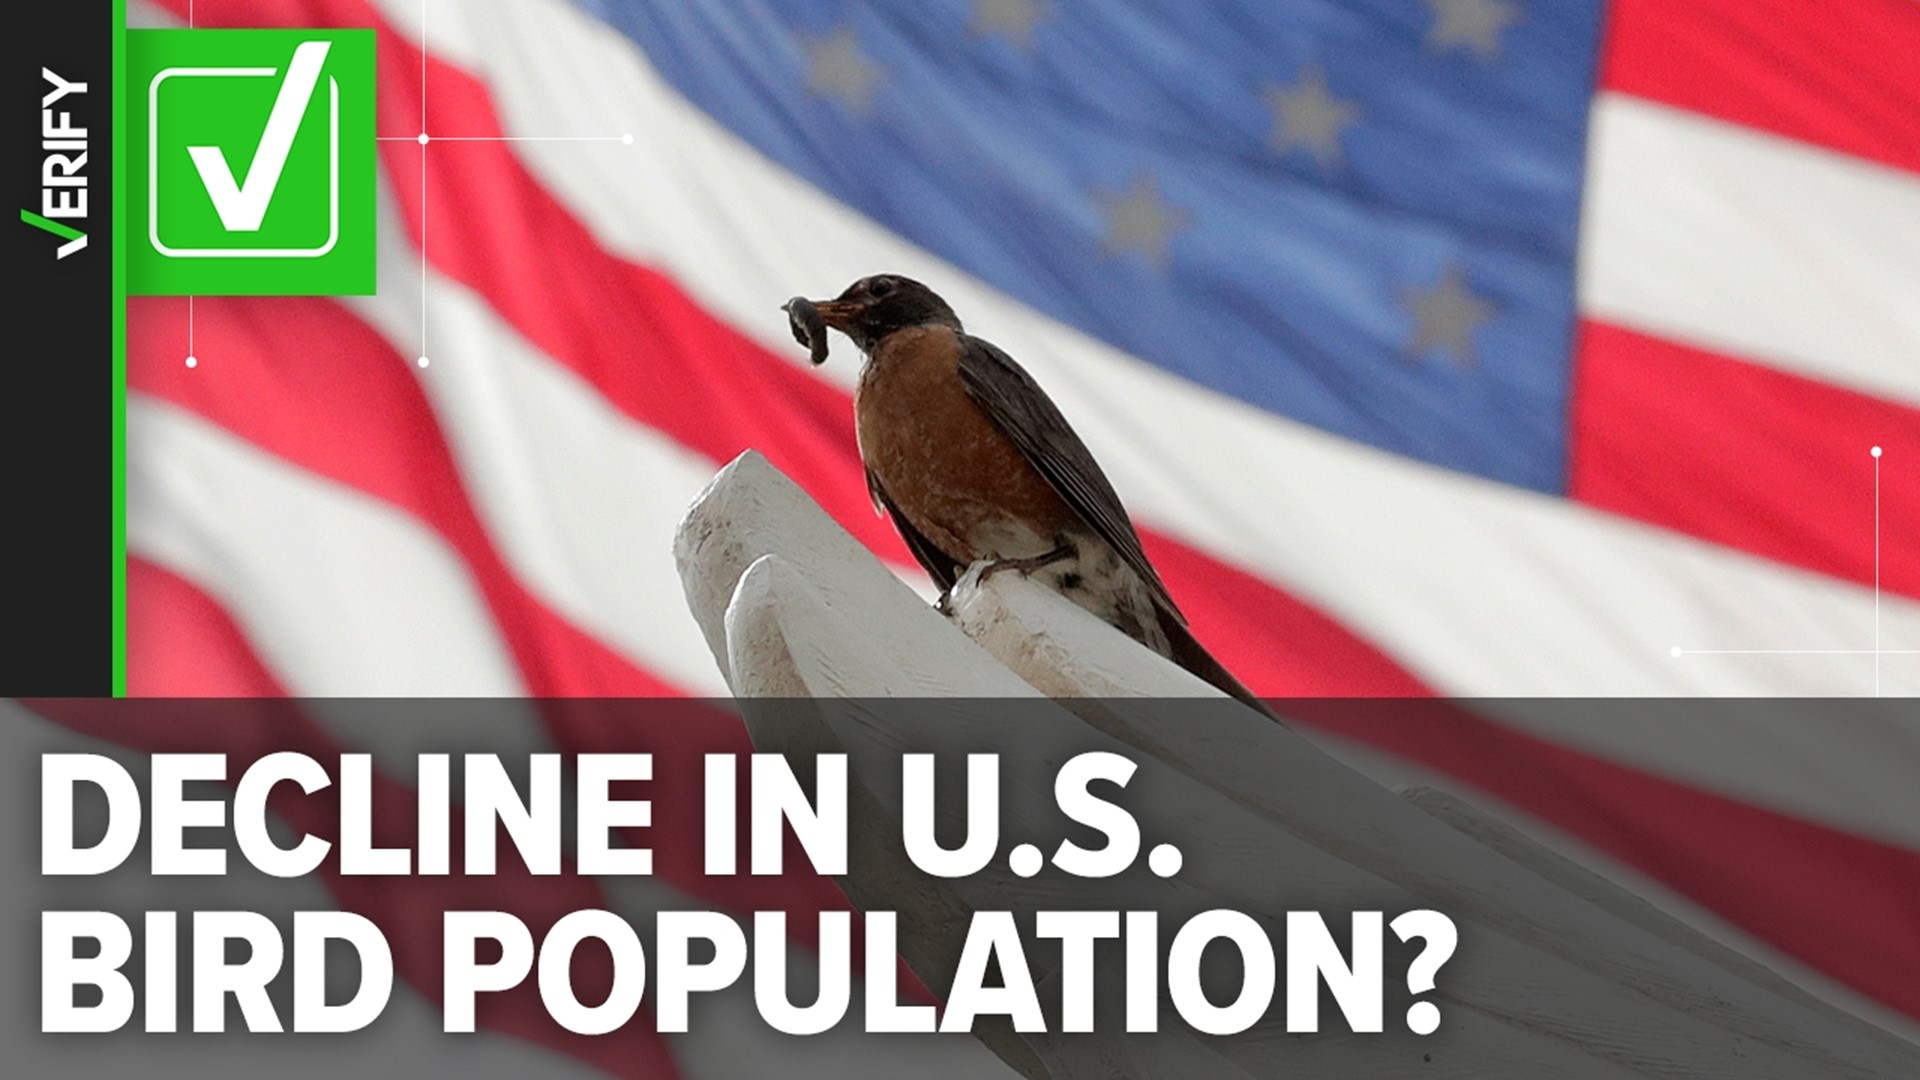 Surveys and studies have consistently found bird populations in North America are in decline. Human threats, like cats and chemicals, are largely responsible.